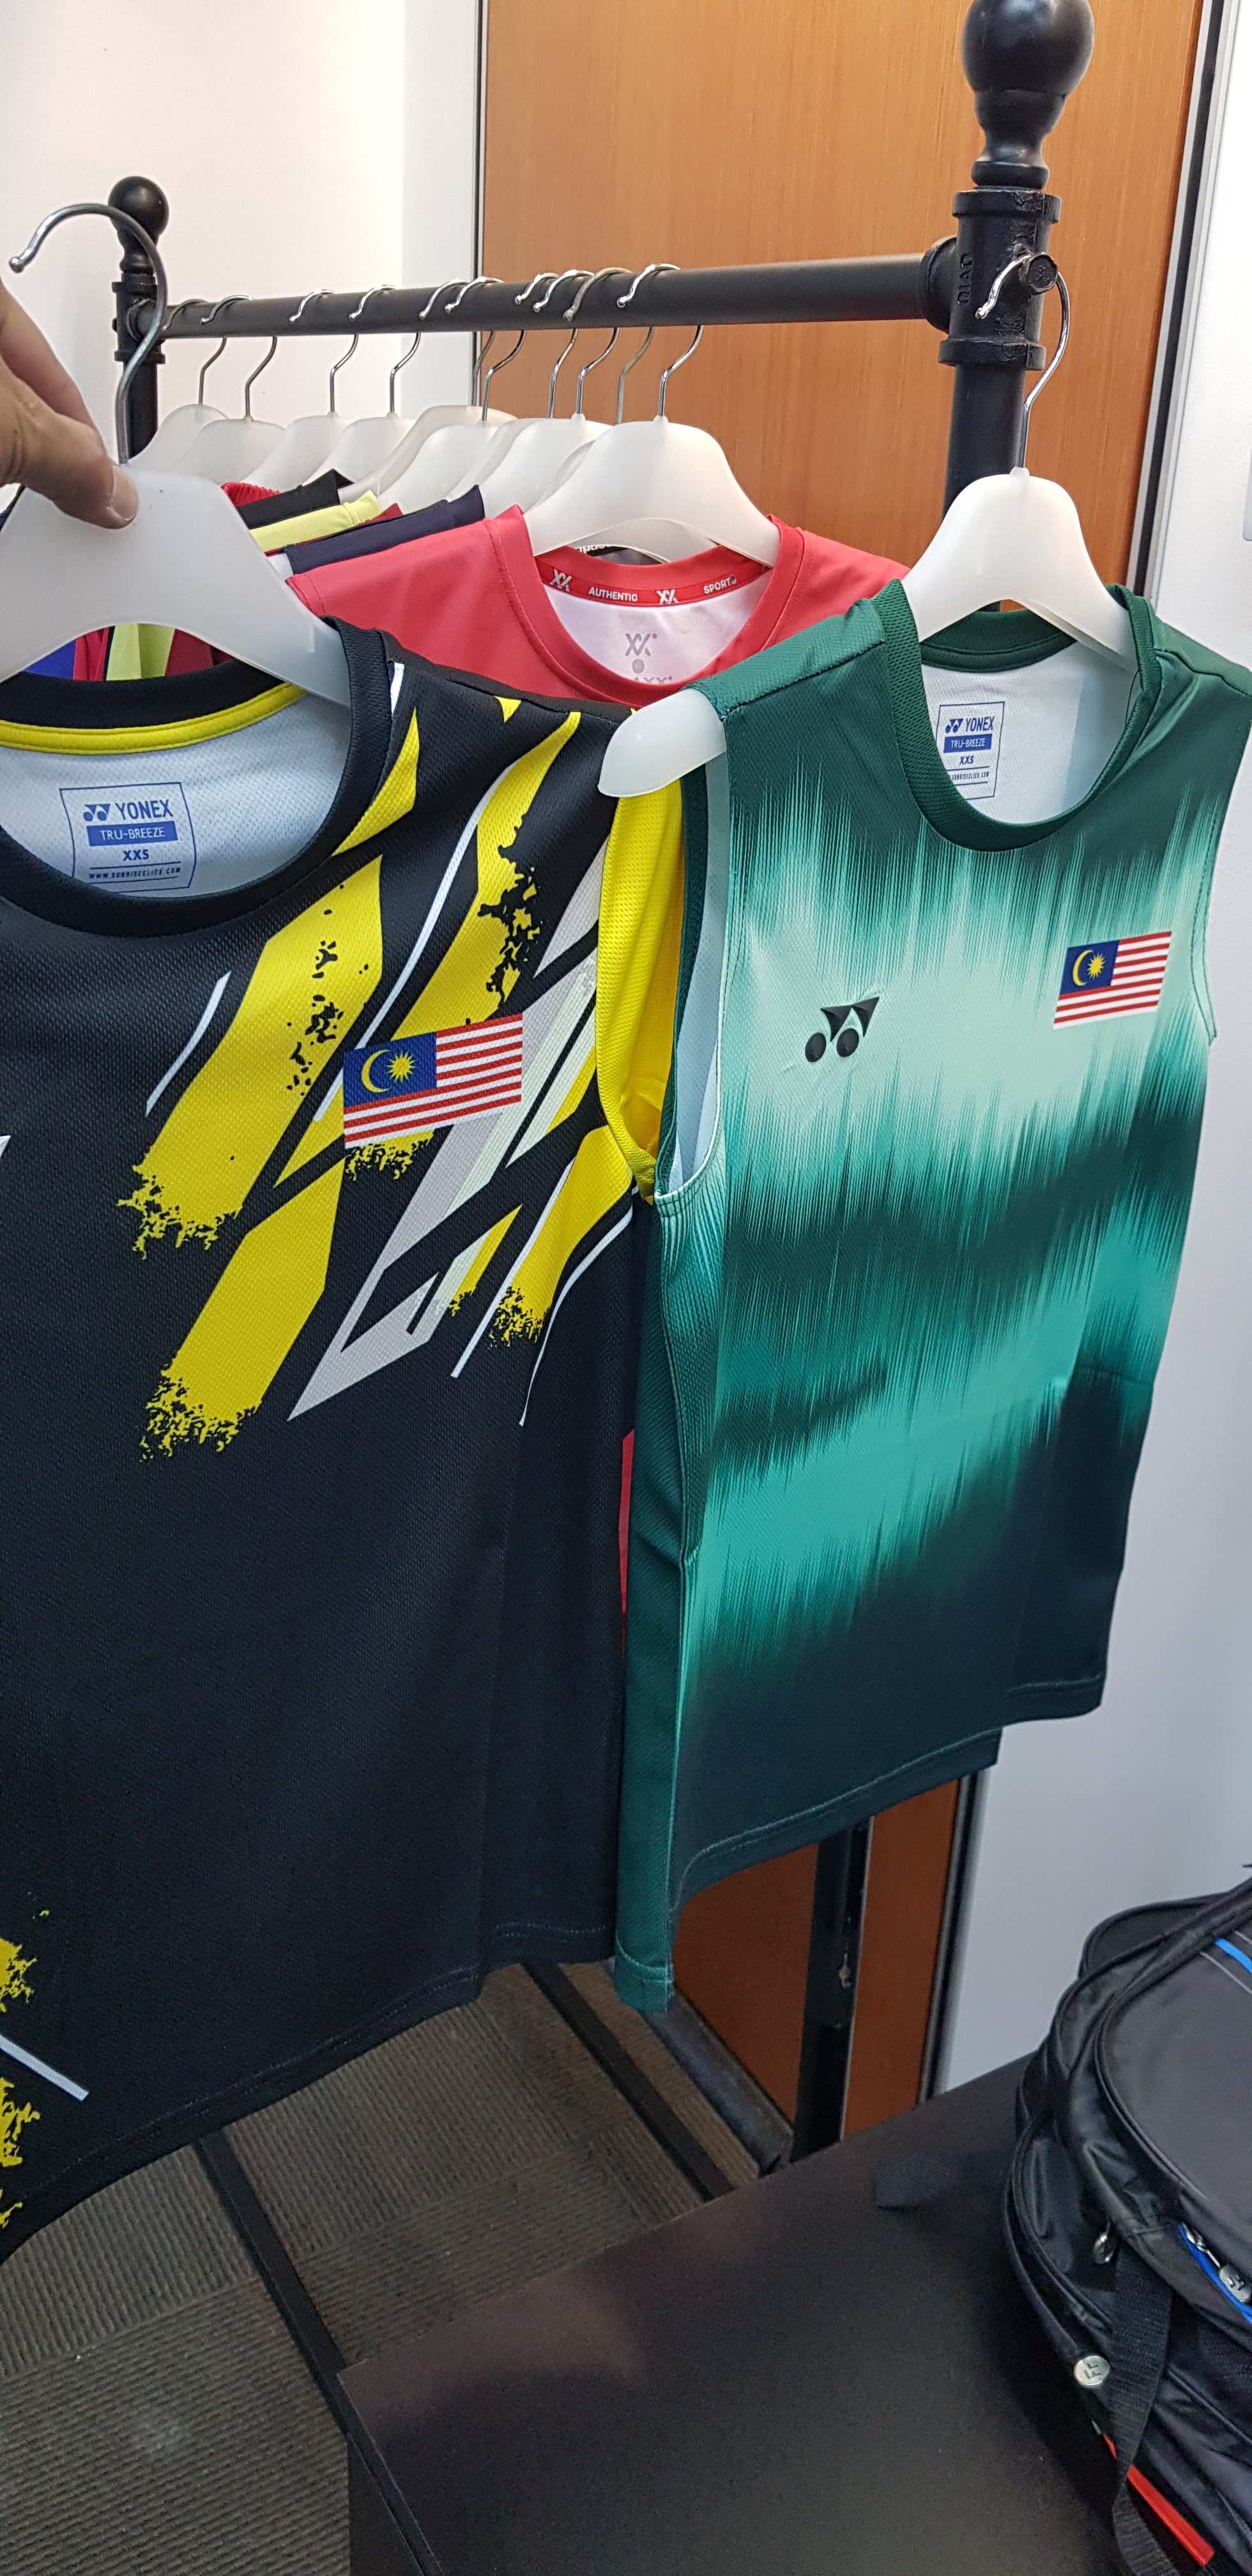 Dri-Fit Shirts For Sale at PJ South Outlet